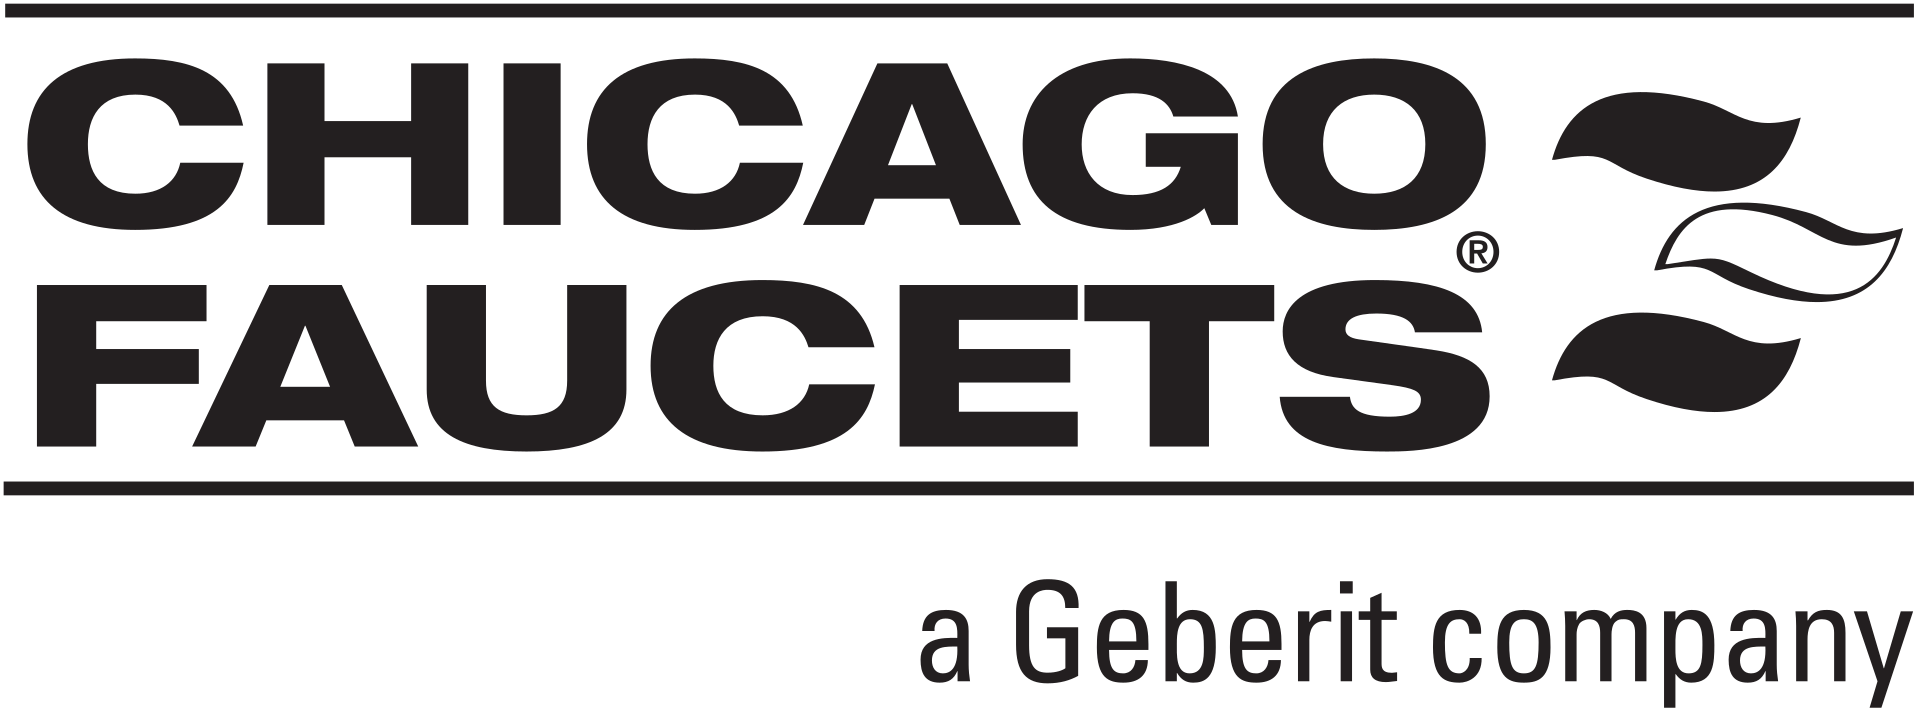 Logo of Chicago Faucets.svg